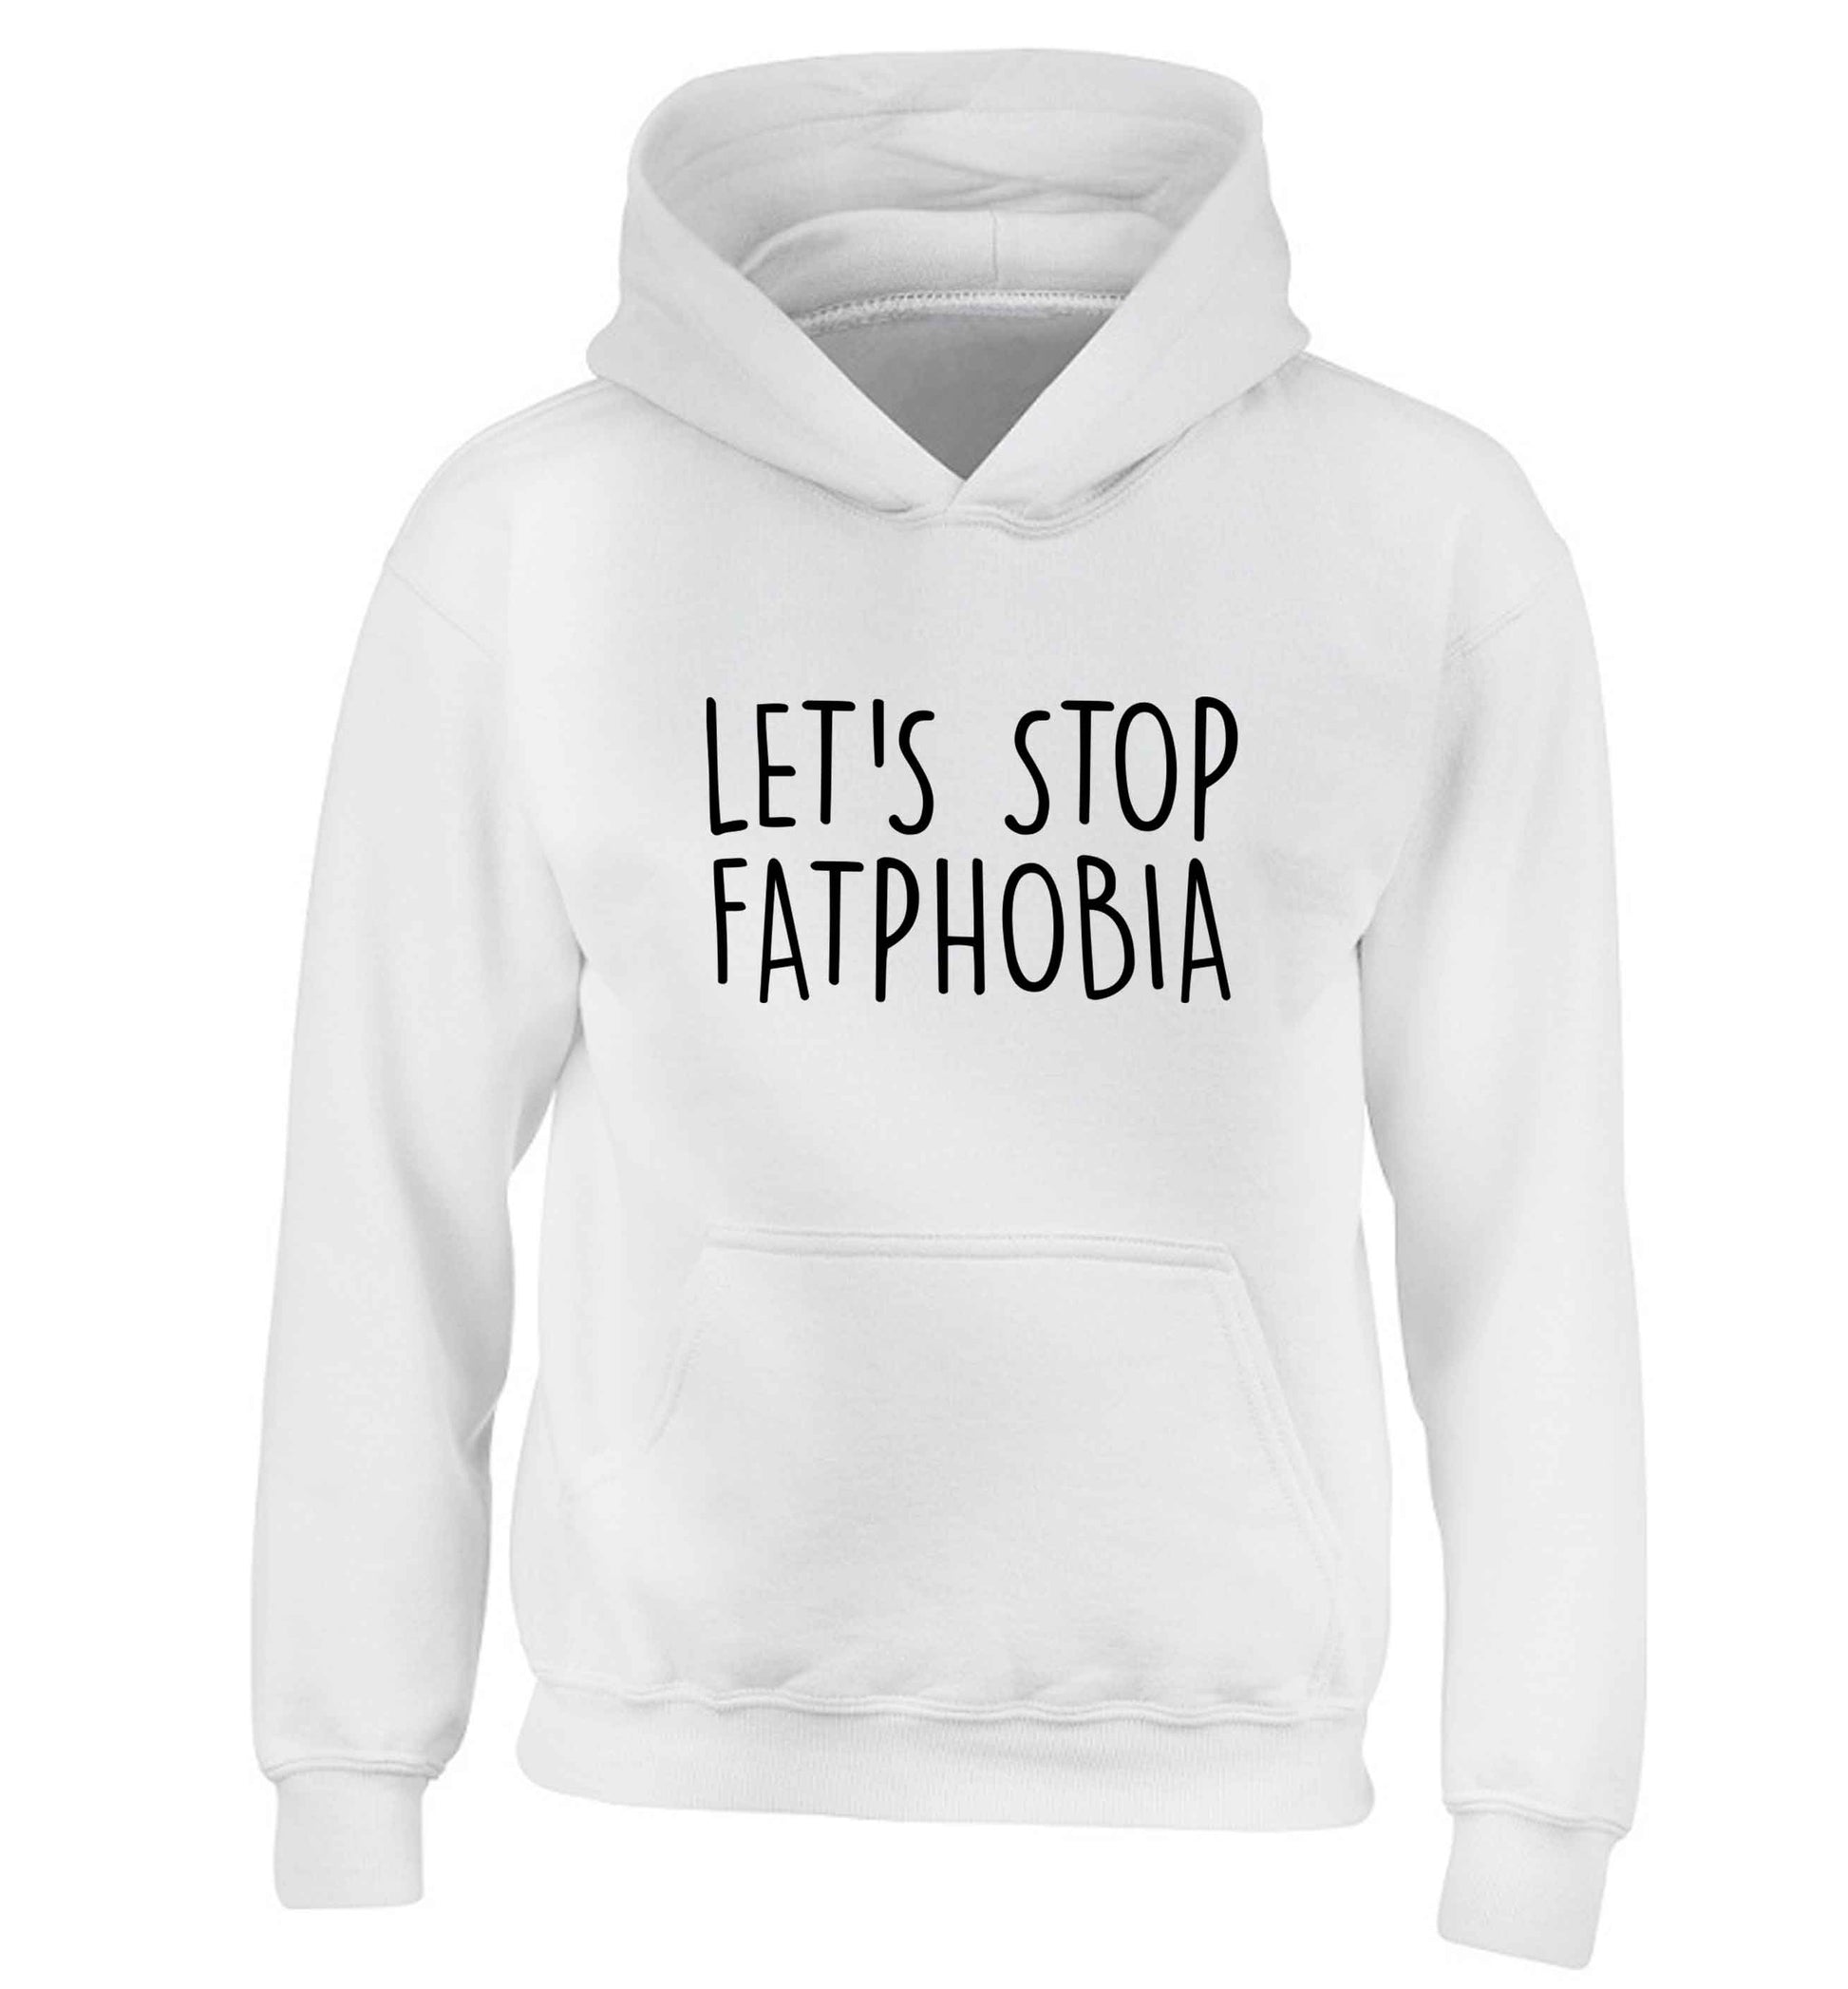 Let's stop fatphobia children's white hoodie 12-13 Years